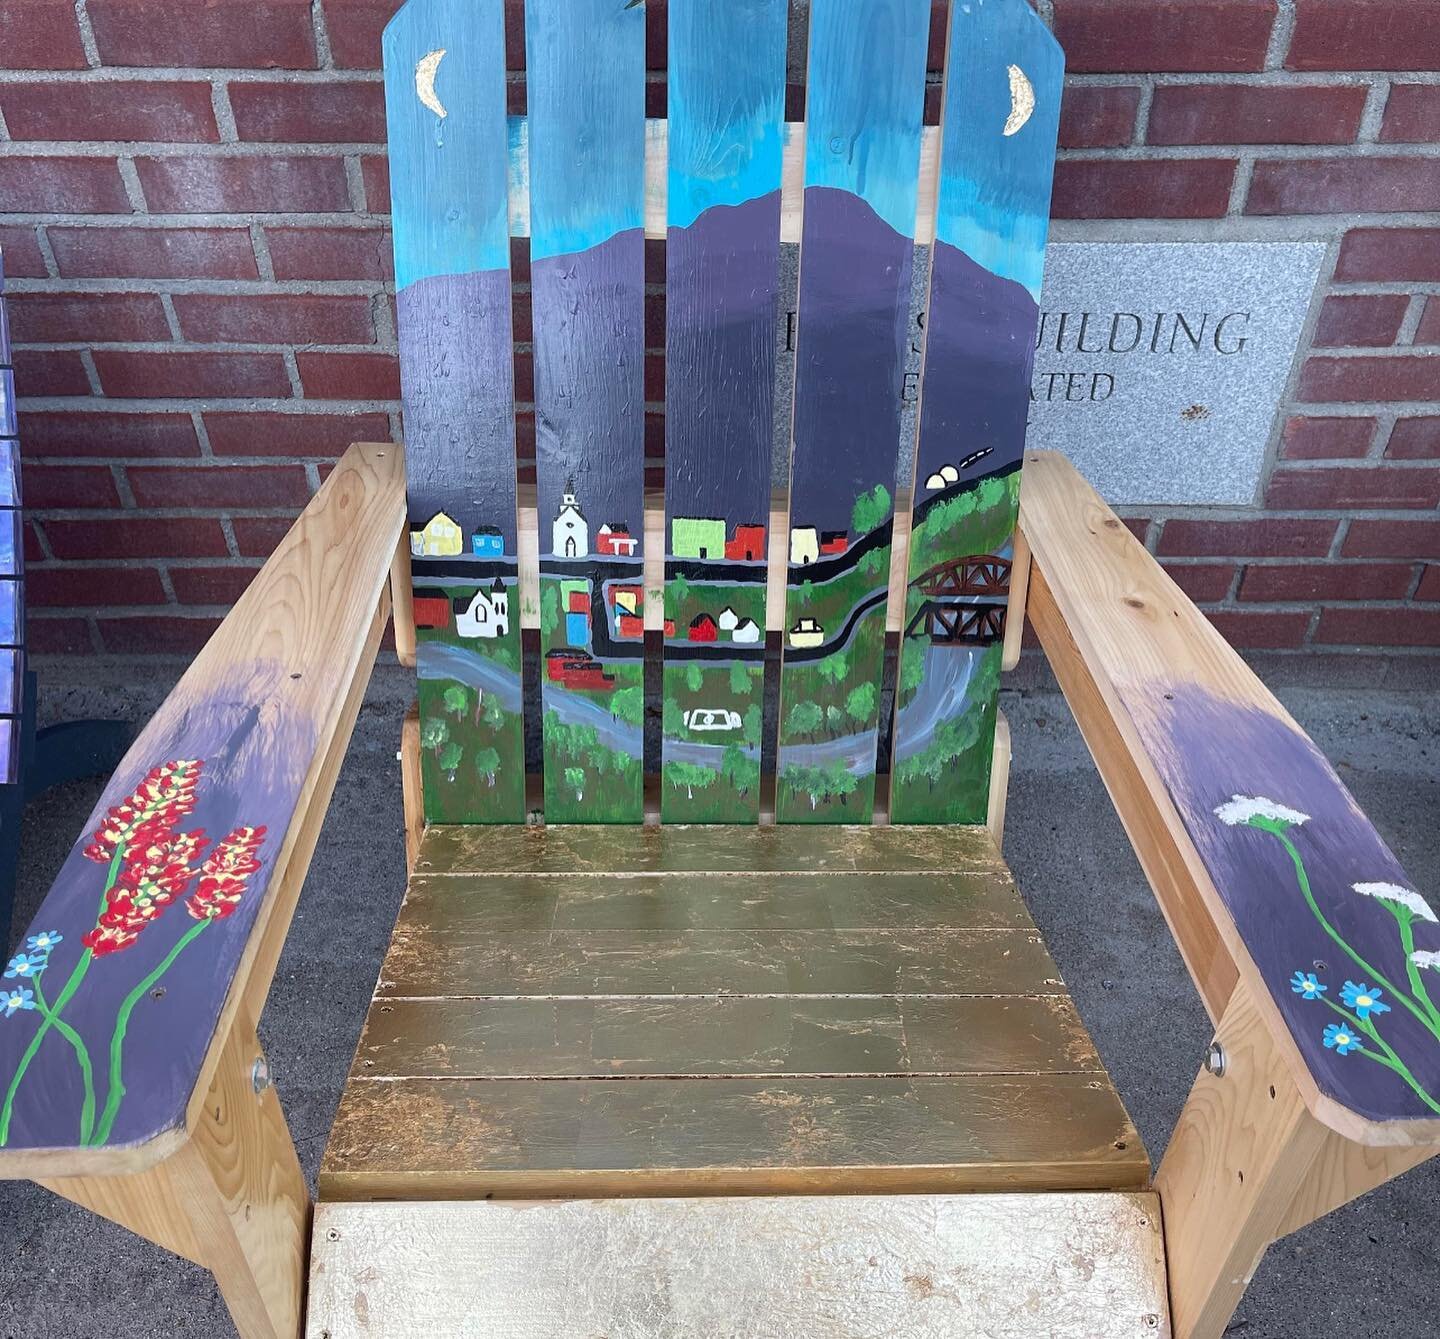 Our annual Chair-Art-Able Auction is just a few weeks away. Come to Rocktoberfest on September 24 to bid on your favorite!

You may have noticed our yearly crop of painted chairs spread around downtown. These chairs are painted by community members a